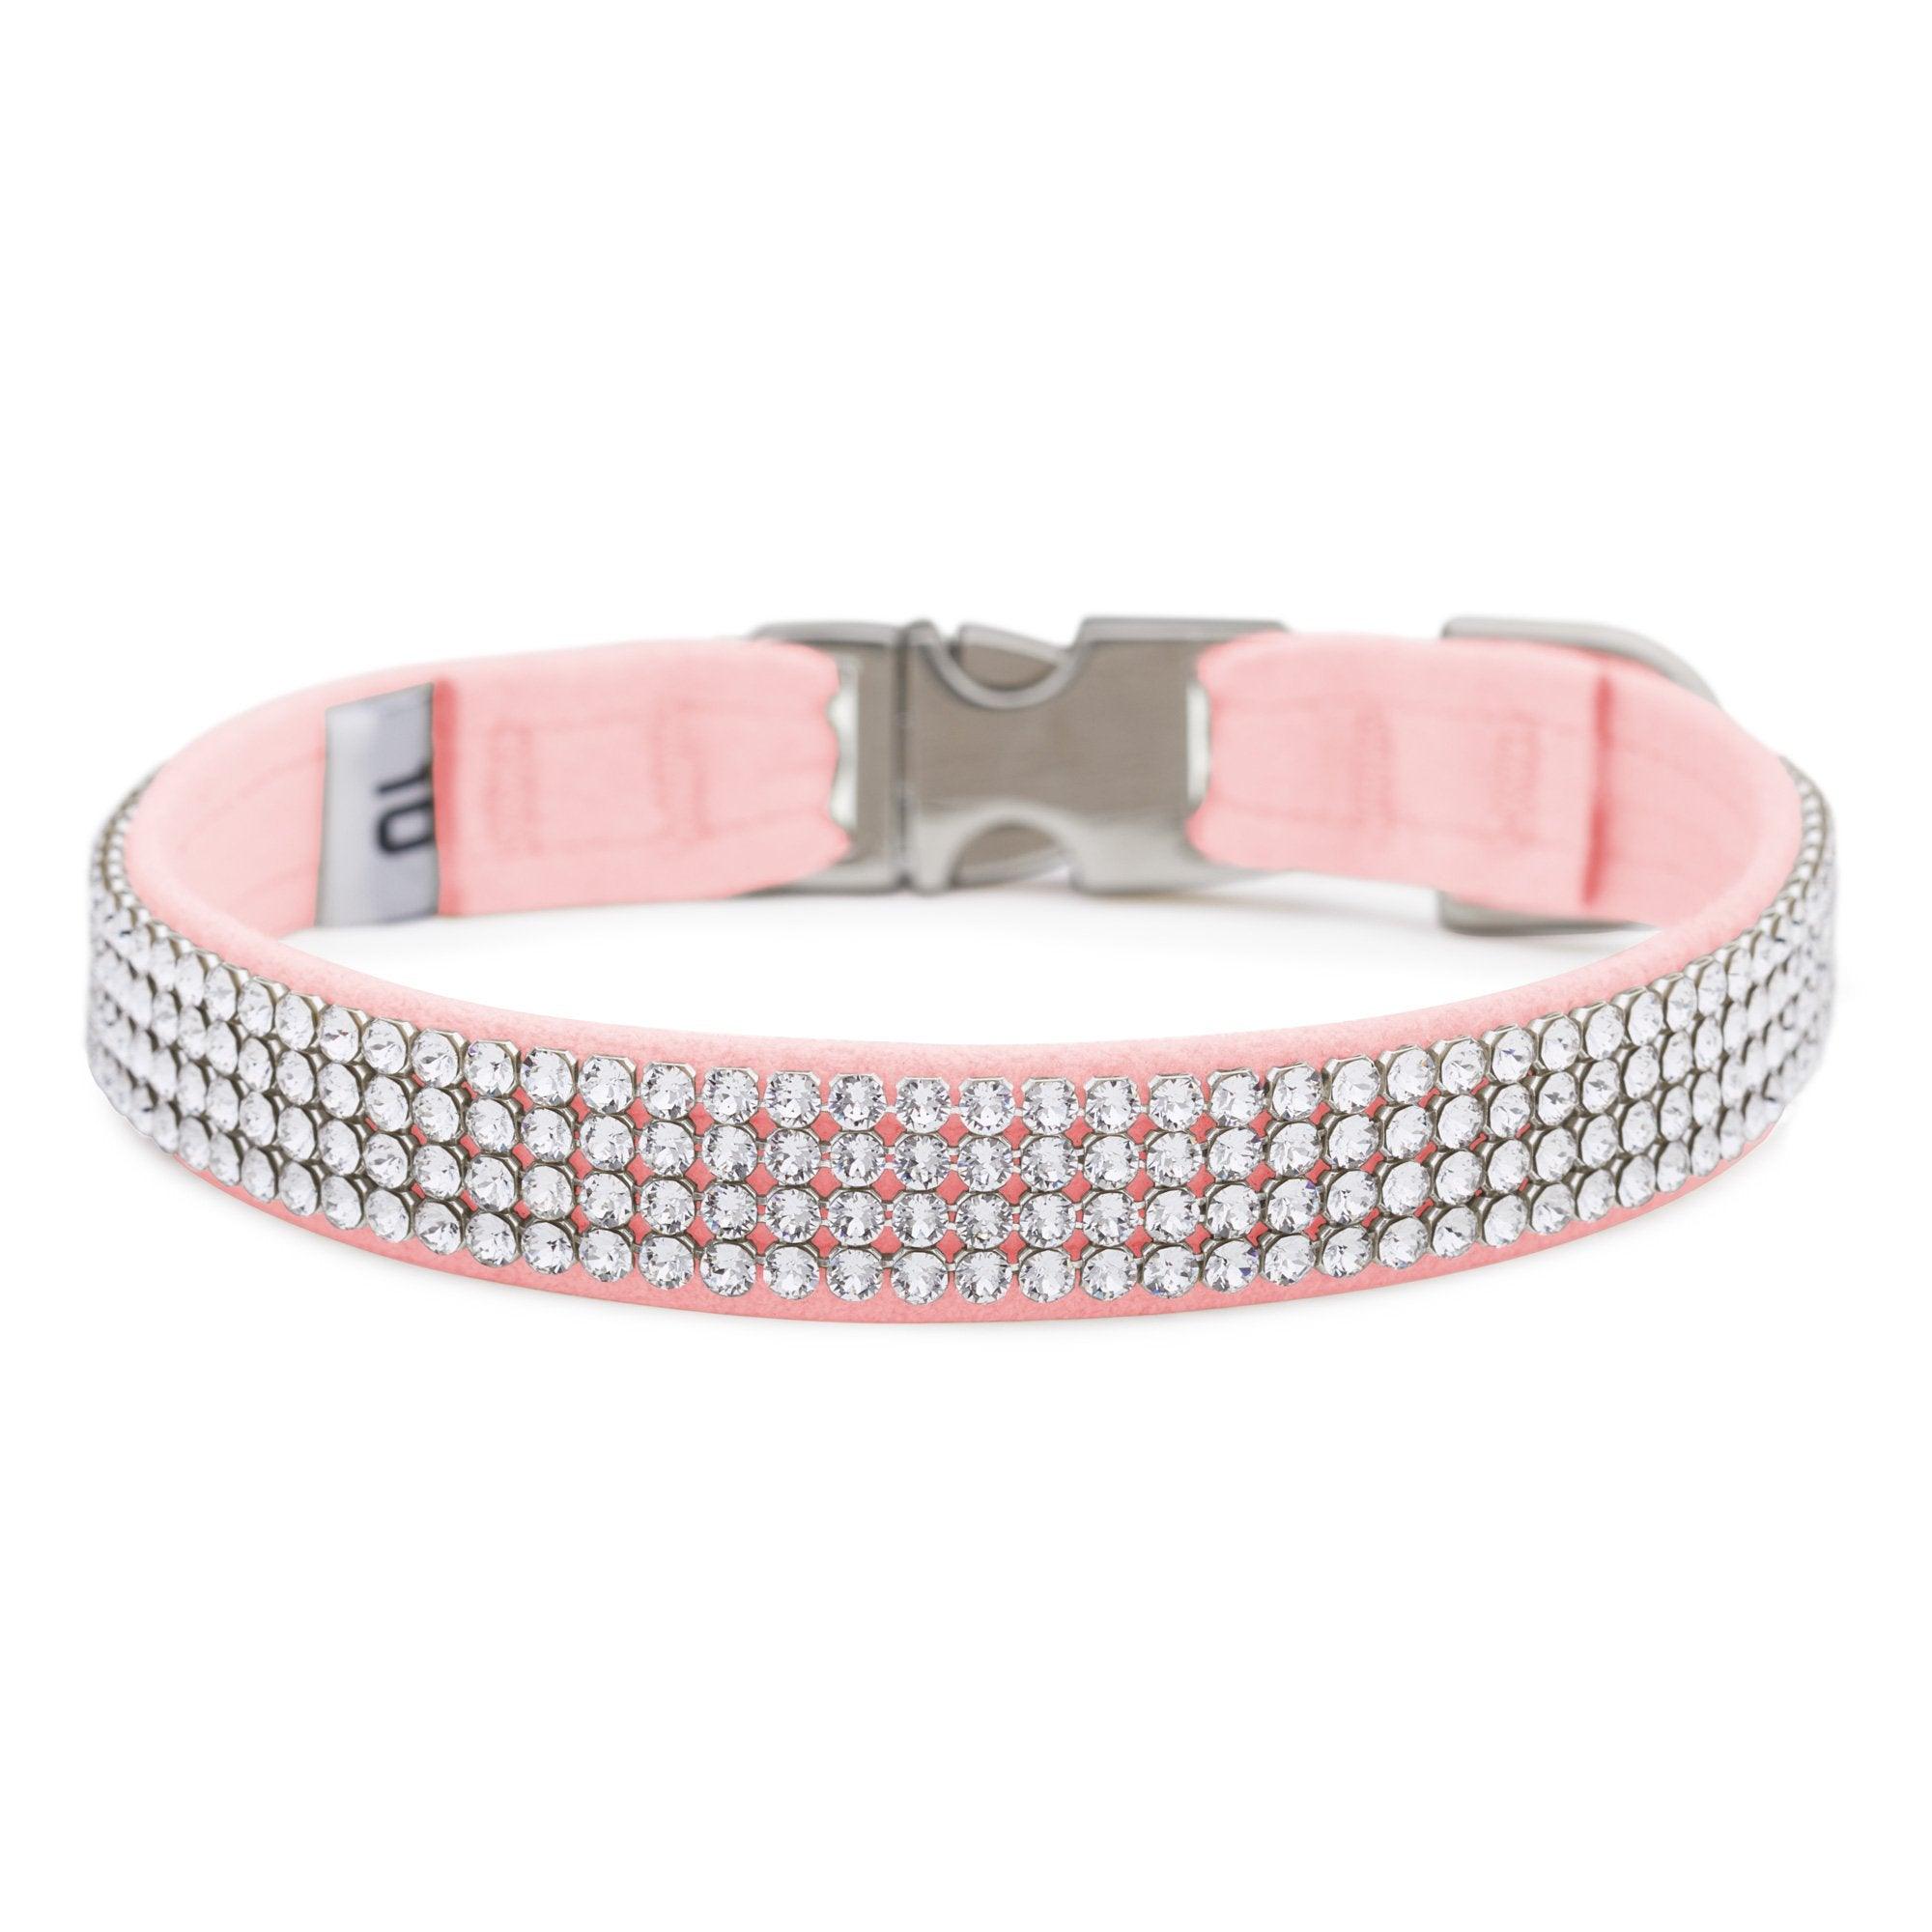 Puppy Pink 4 Row Giltmore Perfect Fit Collar - Rocky & Maggie's Pet Boutique and Salon